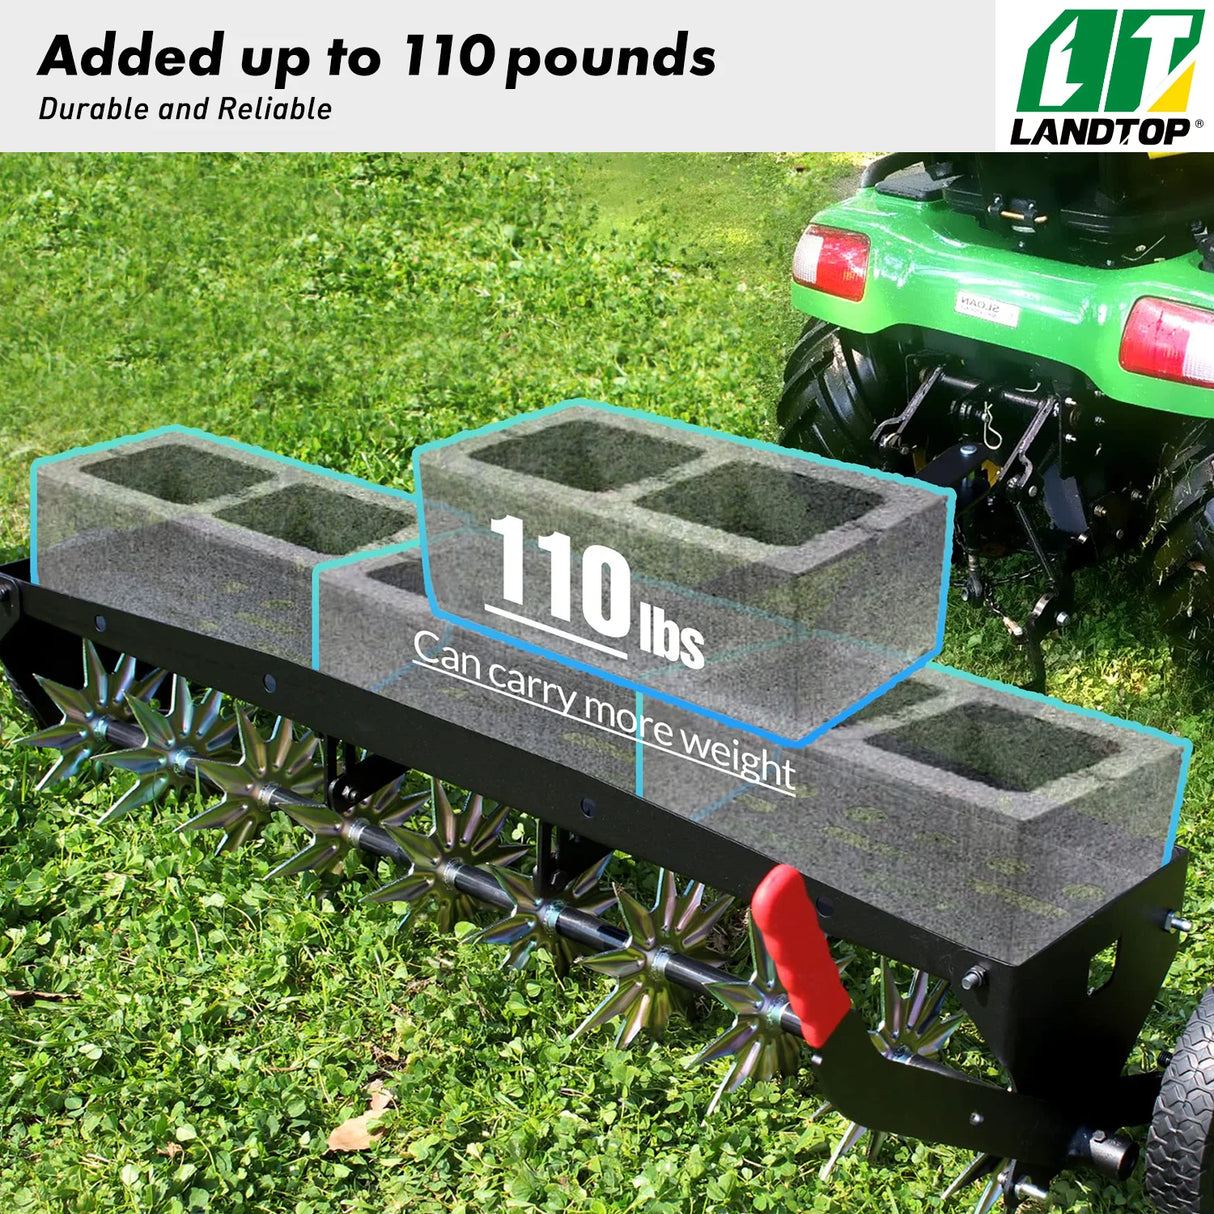 40-Inch Tow Behind Spike Aerator with Galvanized Steel Tines, Durable Lawn Aerator Soil Penetrator Spikes Tractor with Extra-Wide Tow Bar for Lawn and Farm, Black